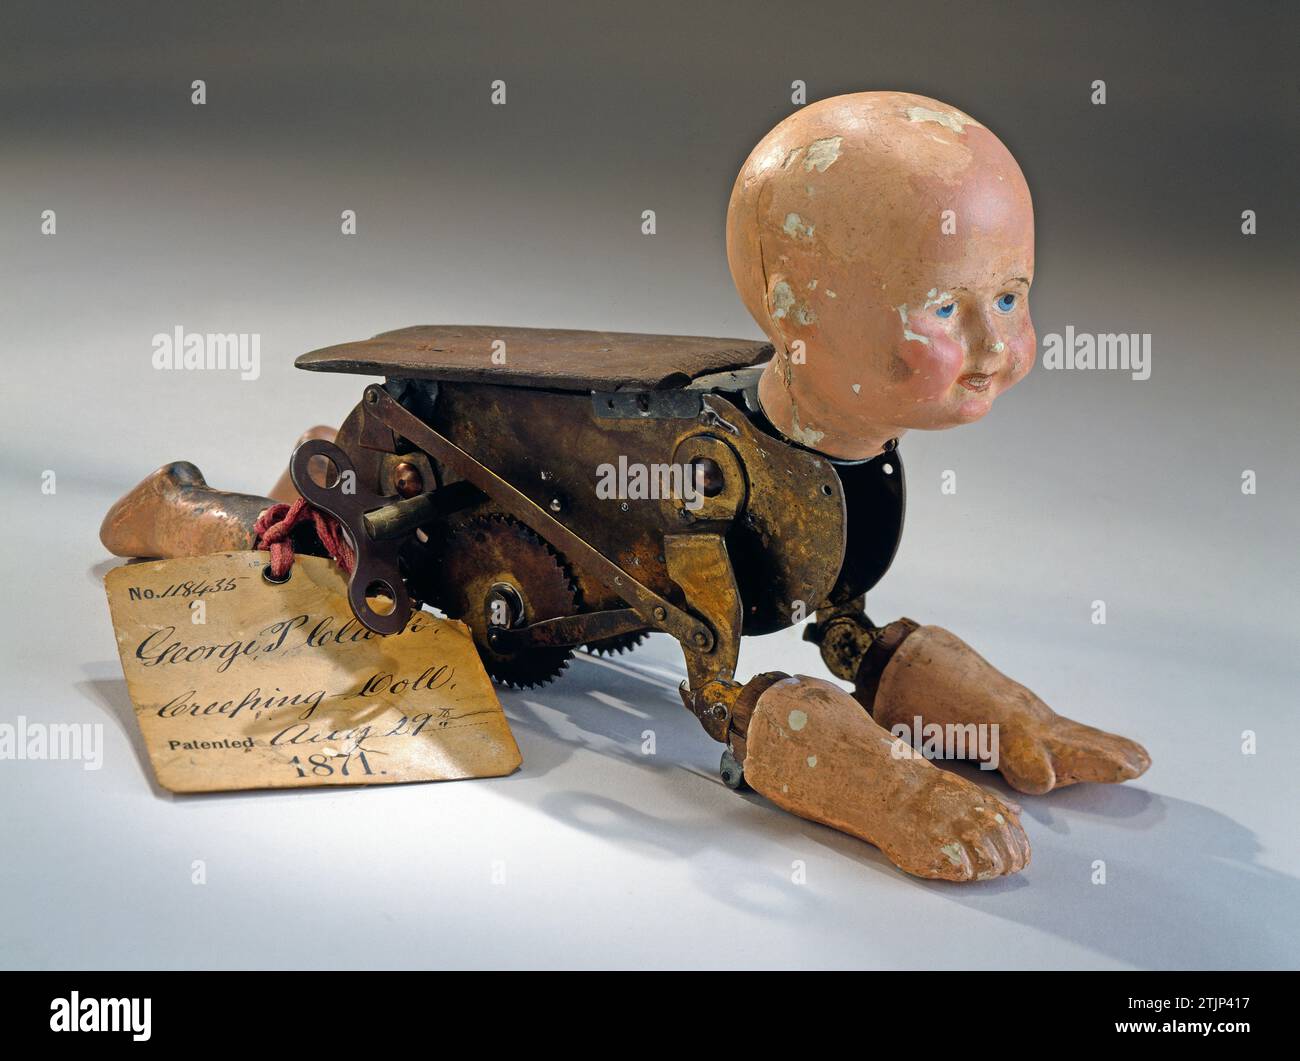 Mechanical creeping baby doll, 1871, patent no.118435, invented by George P. Clarke.This model demonstrates the invention of a mechanical crawling doll, receiving U.S. patent No. 118435 on 29 August 1871 for his ÒNatural Creeping Baby Doll.Ó The original patent office tag is still attached with red tape. Clarke's patent was an improvement on the crawling baby doll patent of his associate Robert J. Clay (No. 112550 granted 14 March 1871).  Optimised version of an image of an object in the Smithsonian American Art Museum, Washington DC, USA. Stock Photo